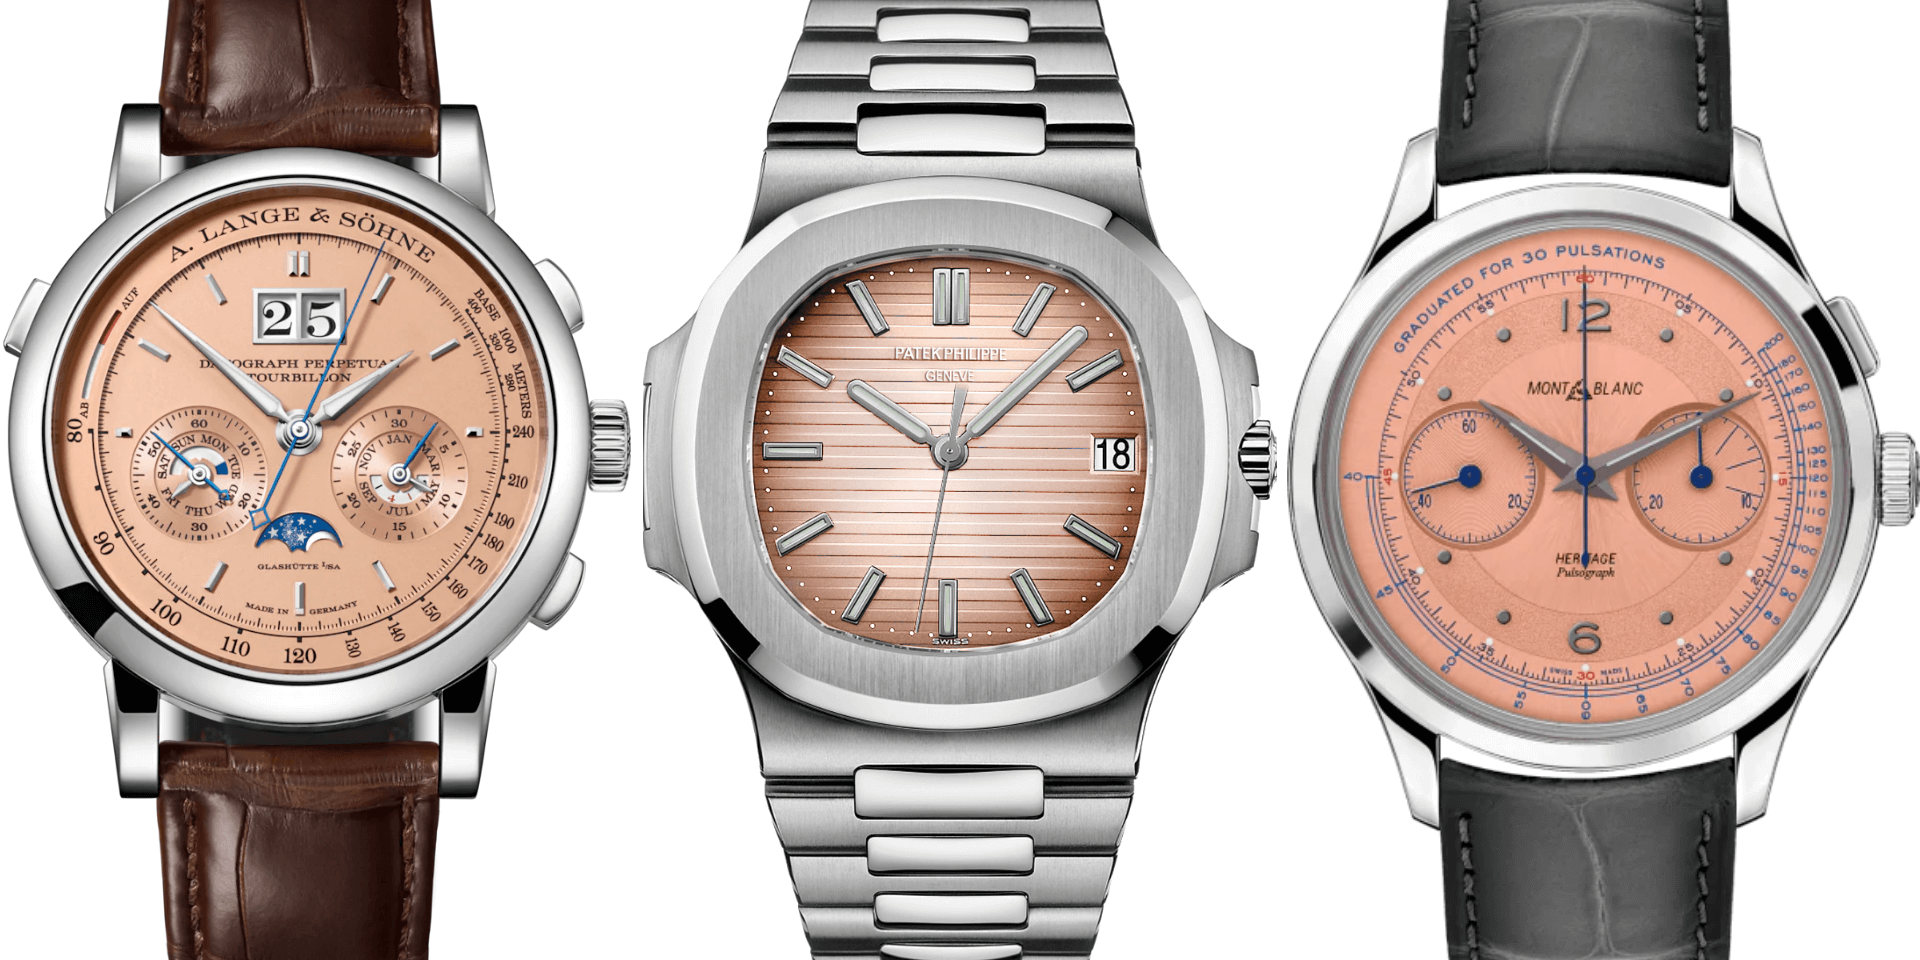 3 watch icons with a salmon dial